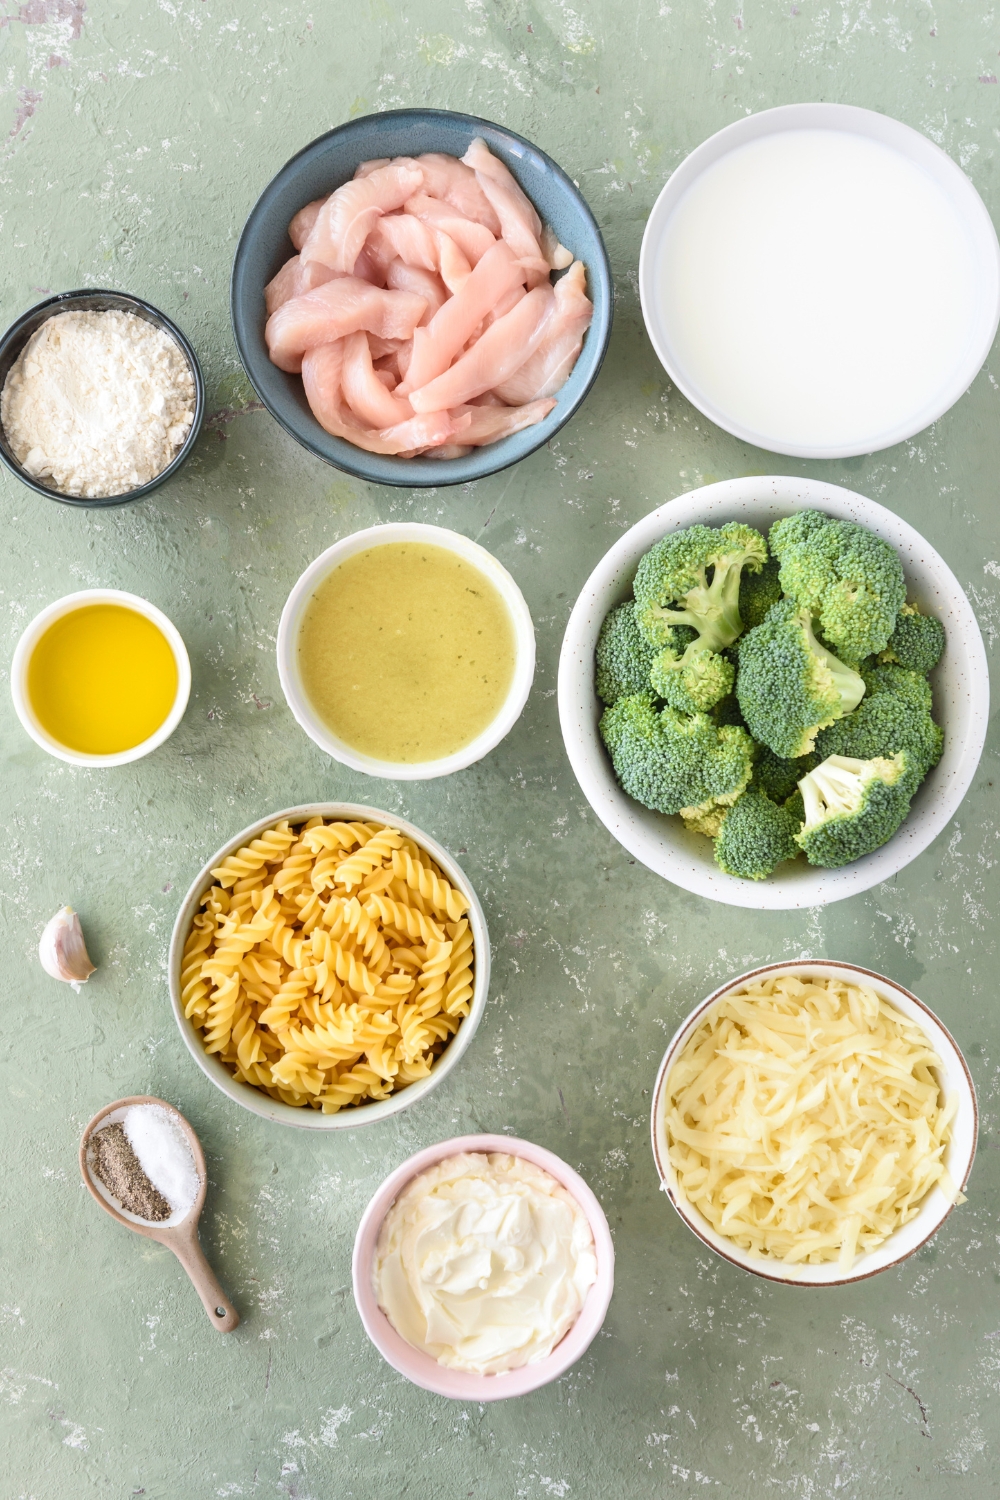 An assortment of ingredients including bowls of raw chicken strips, milk, shredded cheese, fresh broccoli, dried pasta, broth, oil, and spices.